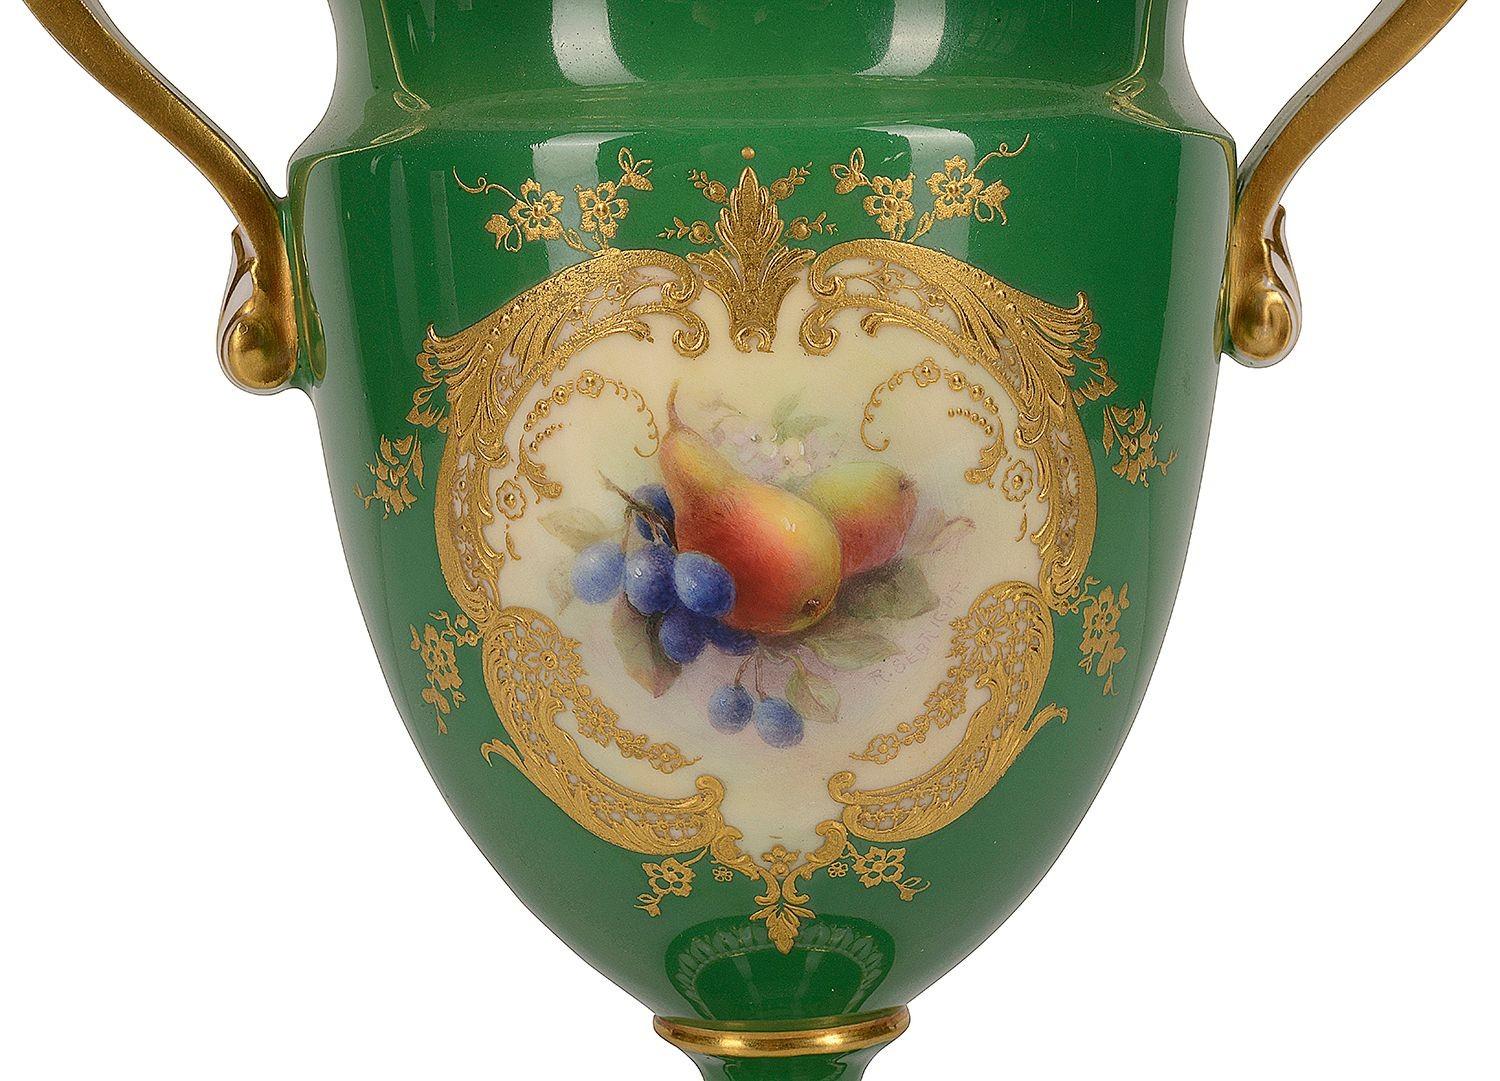 A fine quality Royal Worcester porcelain two handle vase, having a pale green ground with classical gilded scrolling highlights and boarders, the inset hand painted panel depicting pears, flowers and berries. Signed to the bottom left.

Batch 65